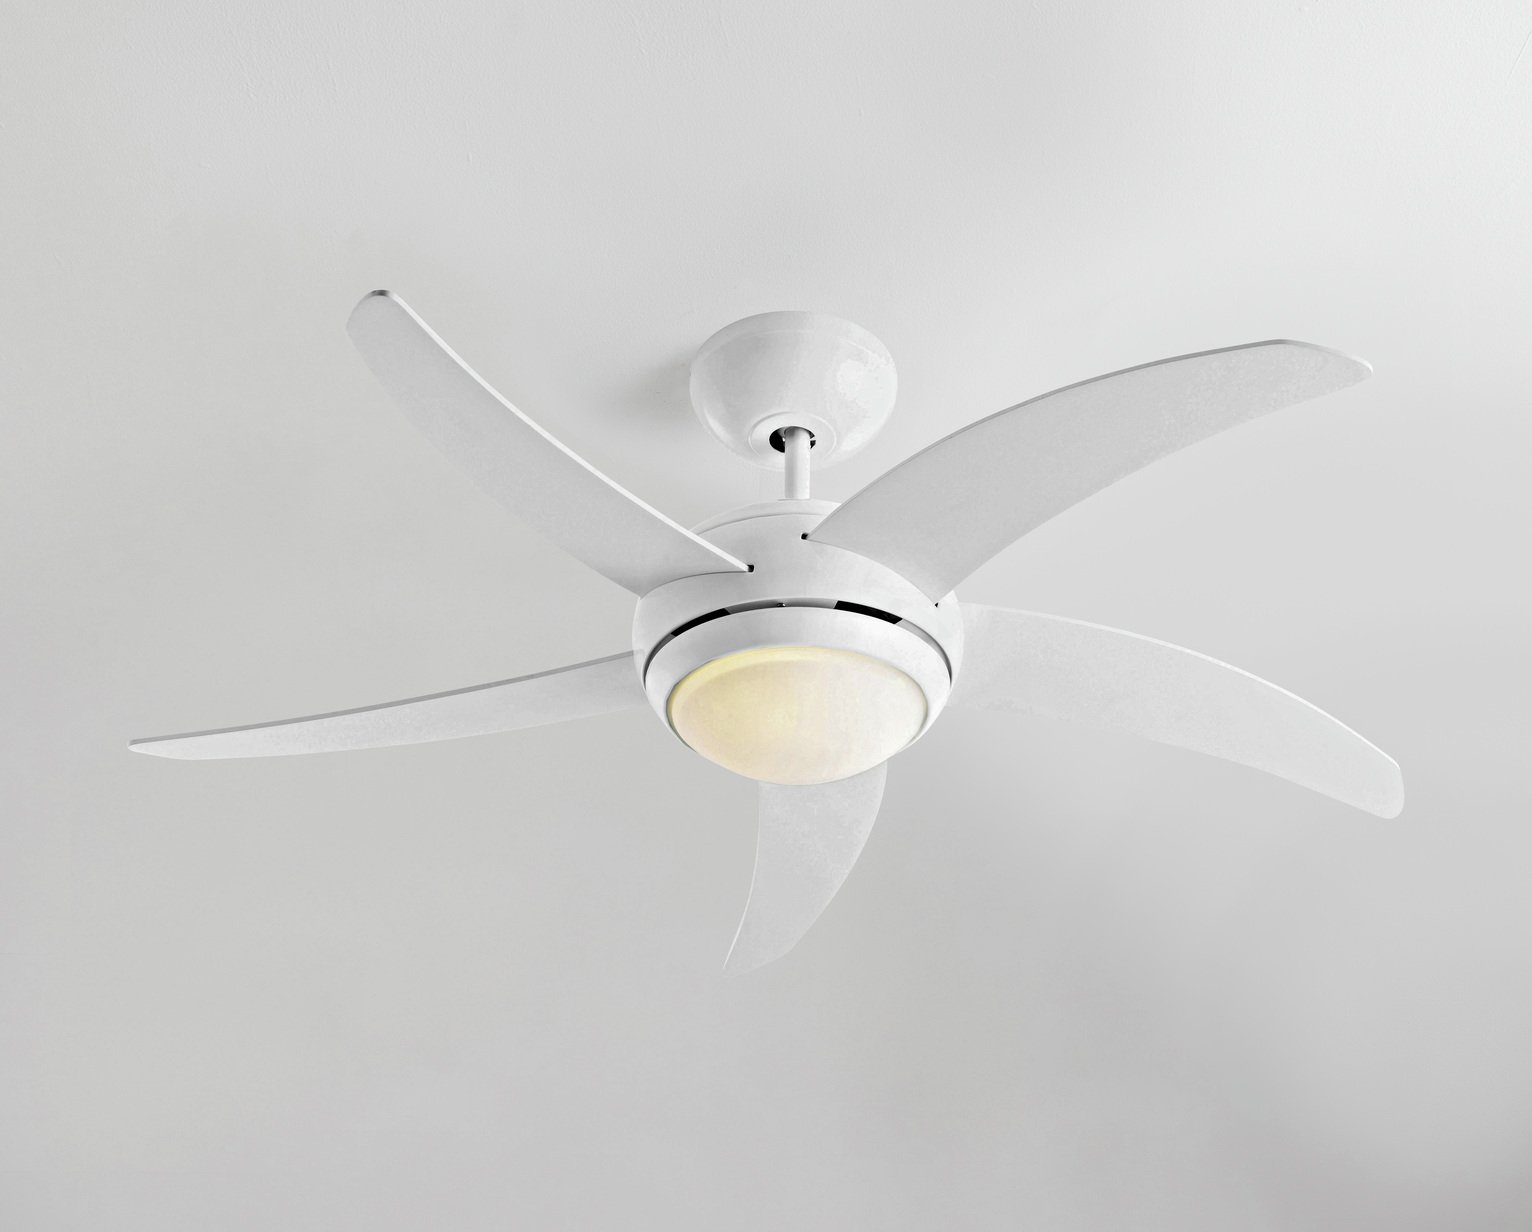 Details About Manhattan Ceiling Fan White Cool Whilst Making Minimal Noise And Vibrations New